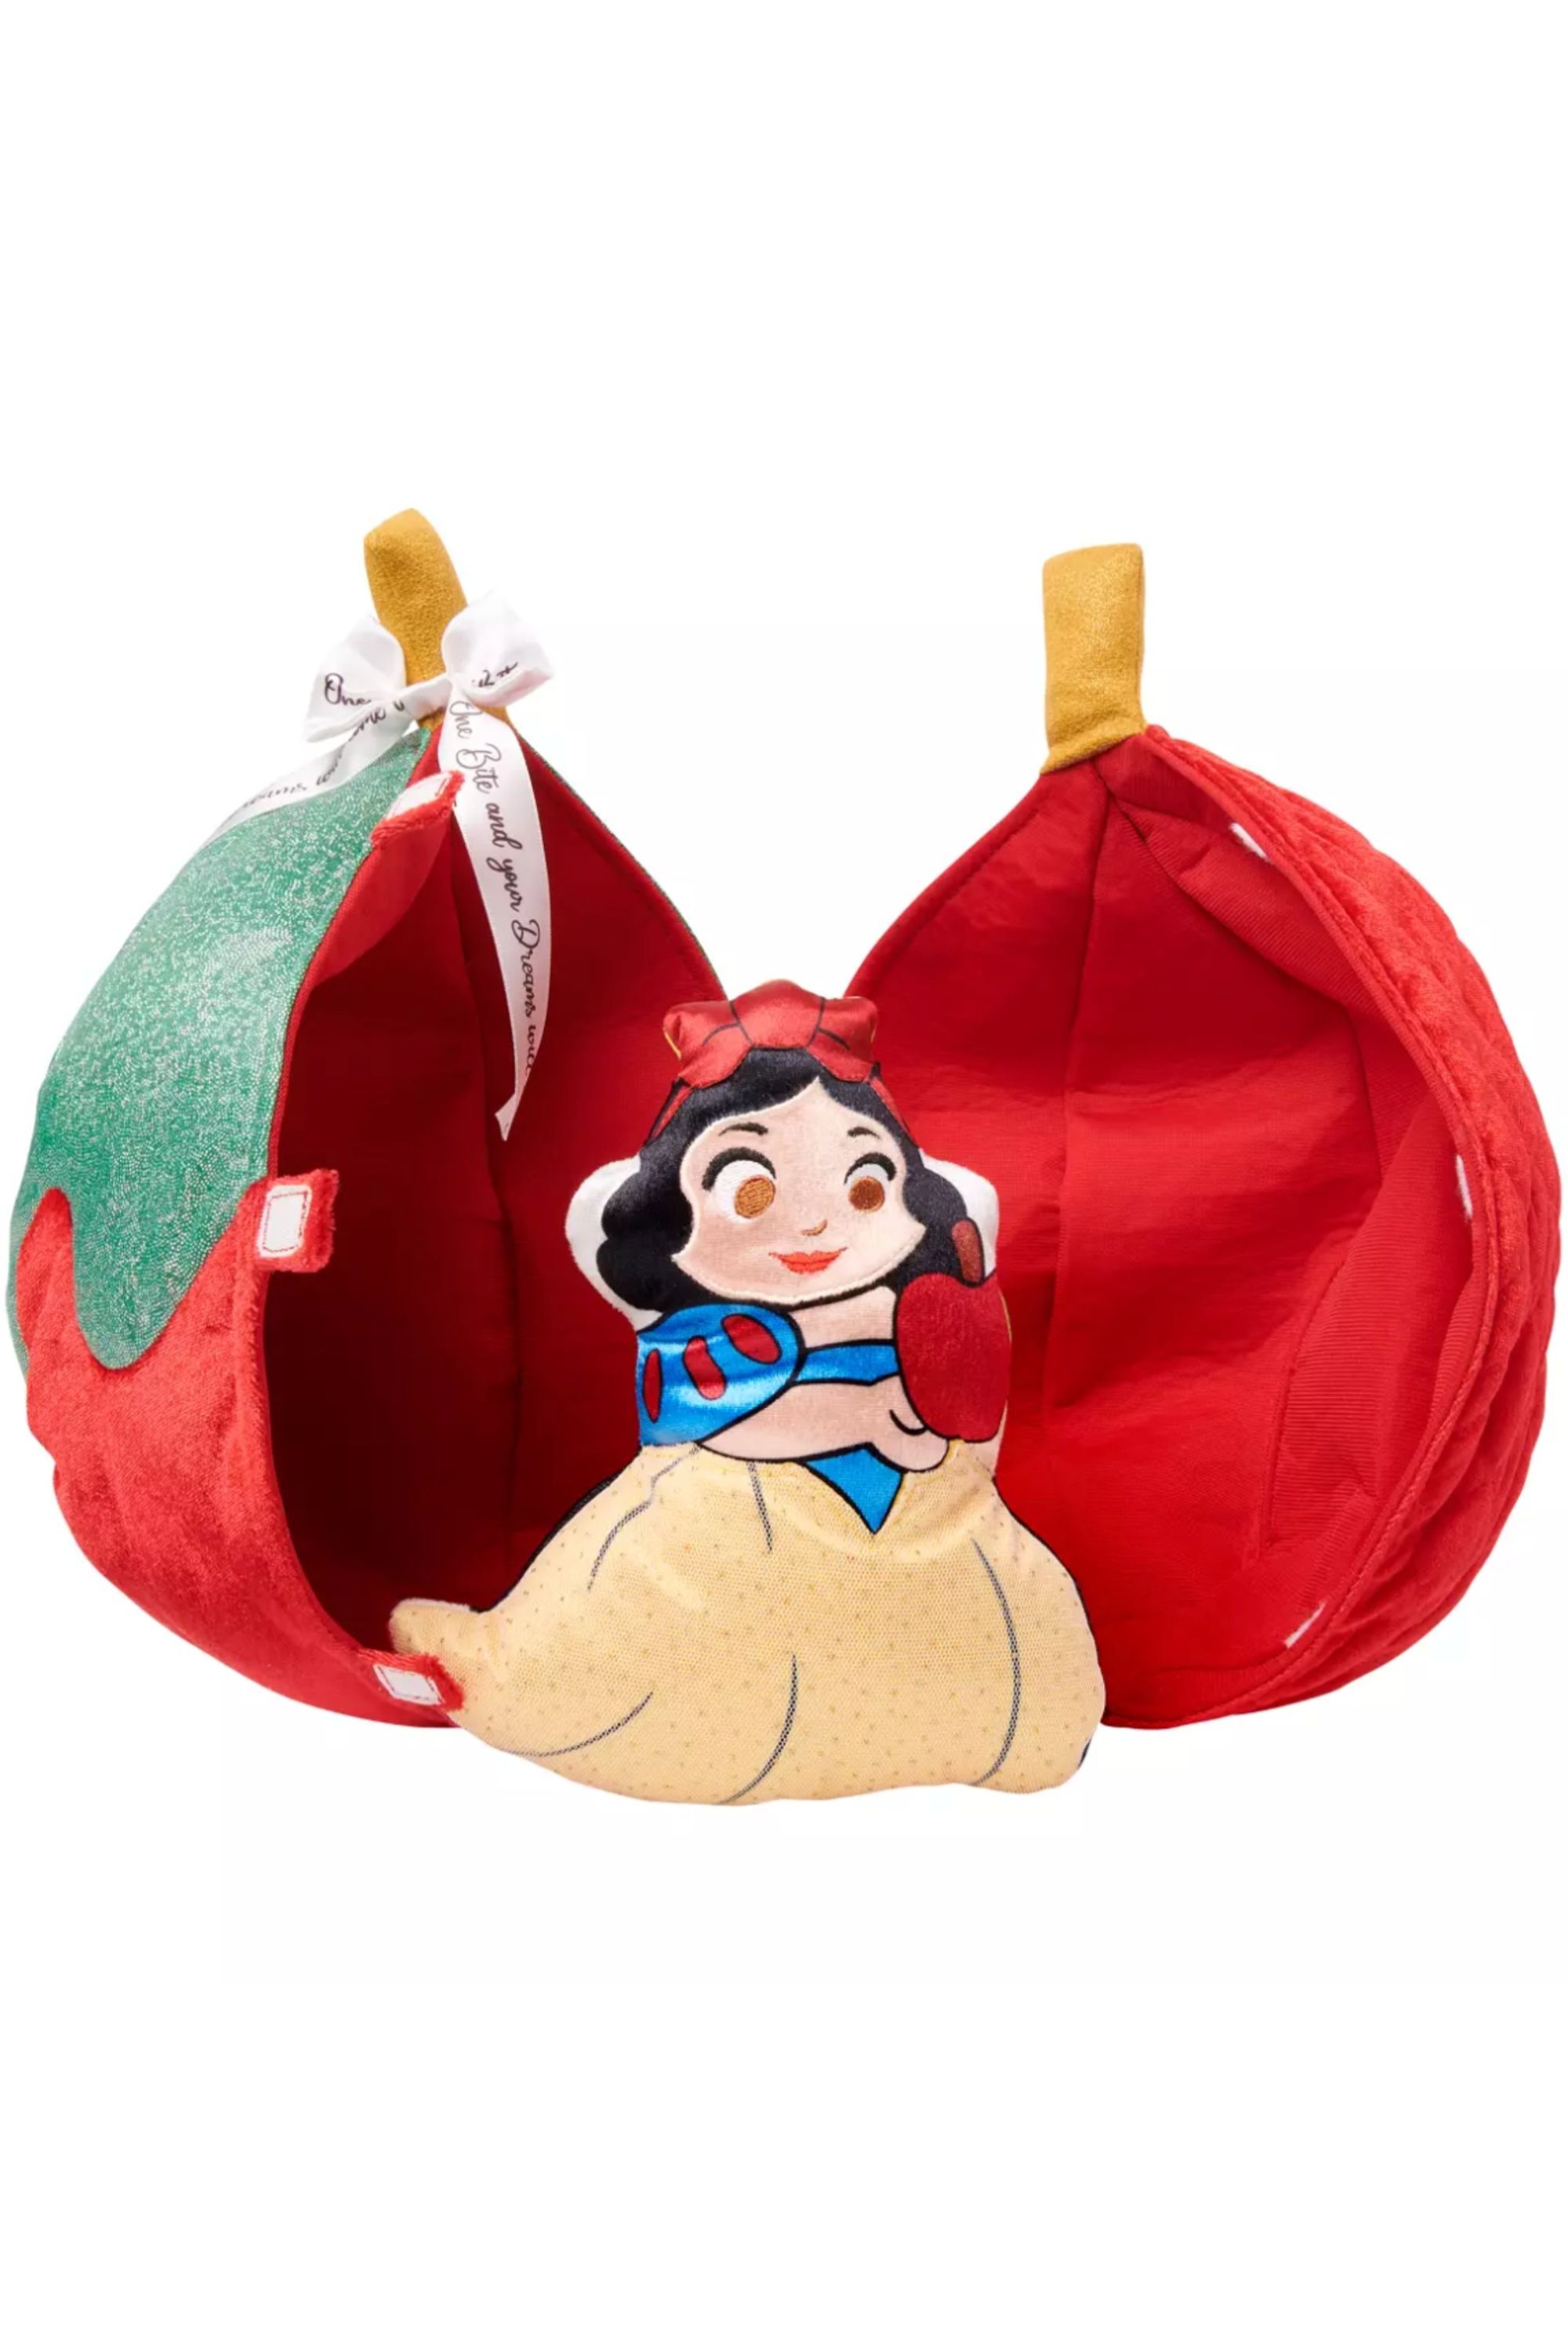 Snow White and the Evil Queen plush in the poisoned apple